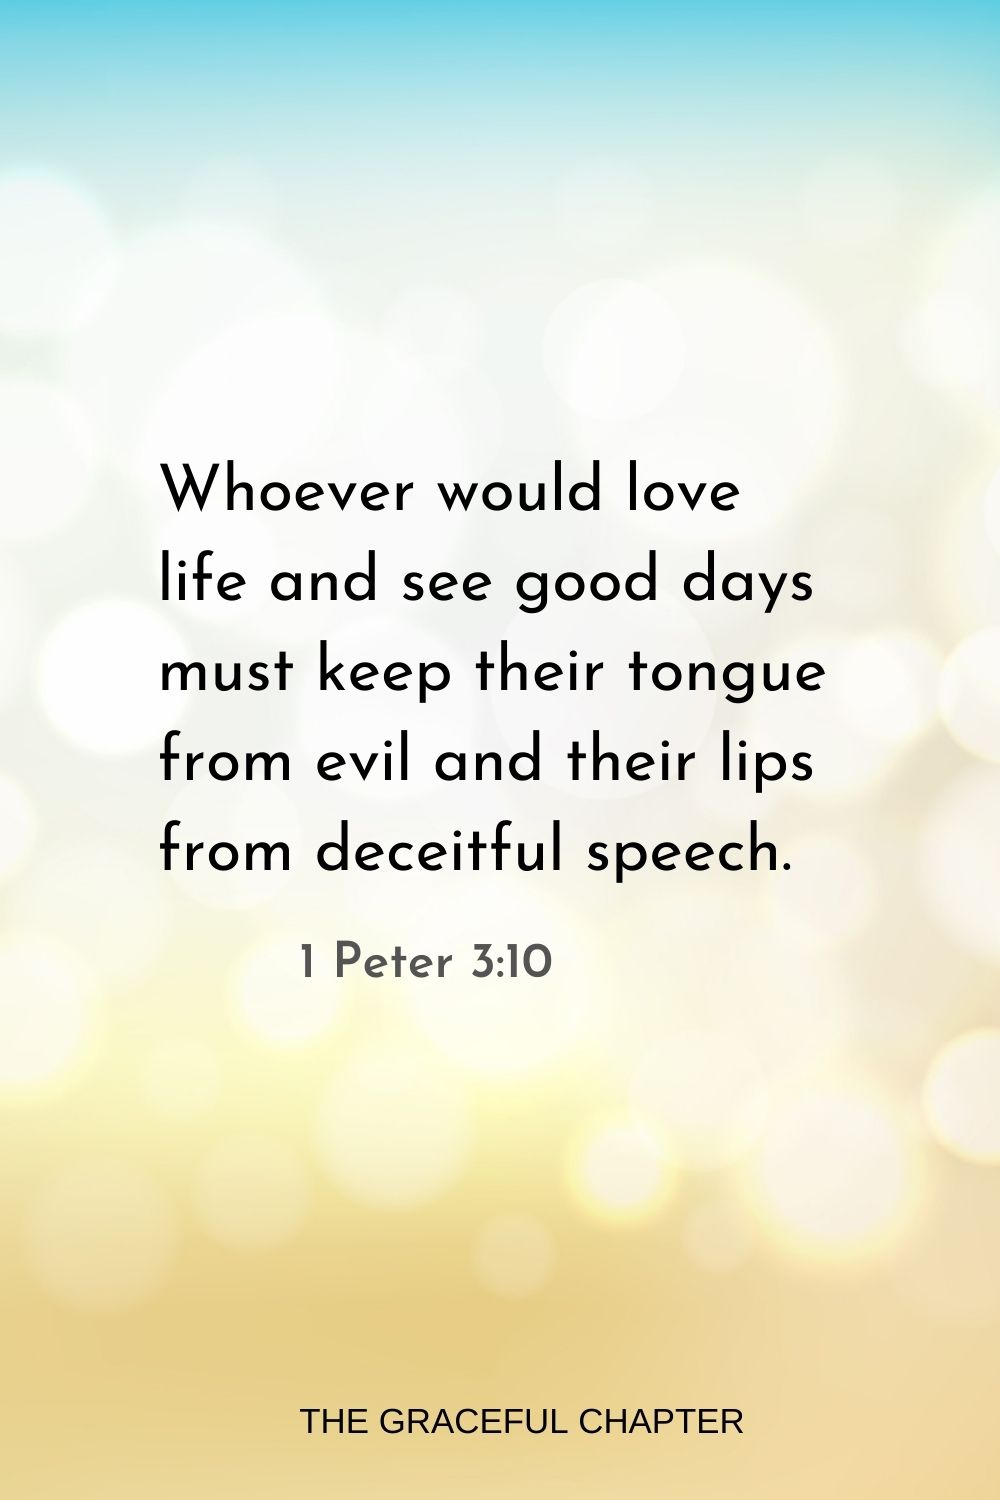 Whoever would love life and see good days must keep their tongue from evil and their lips from deceitful speech. 1 Peter 3:10